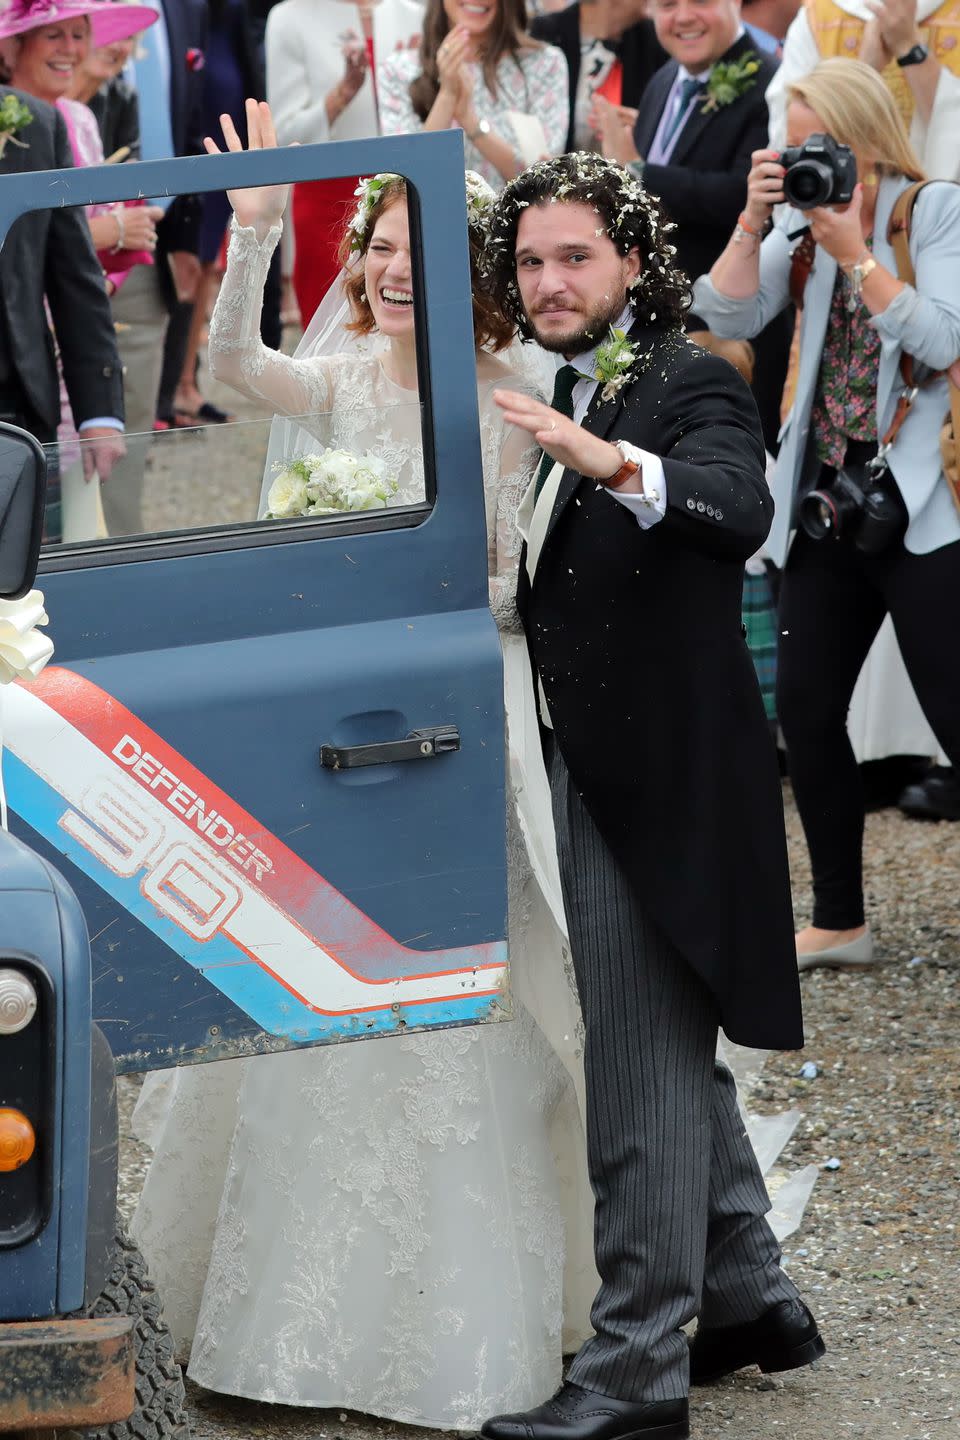 <p>The bride and groom wave to the photographers before departing.</p>